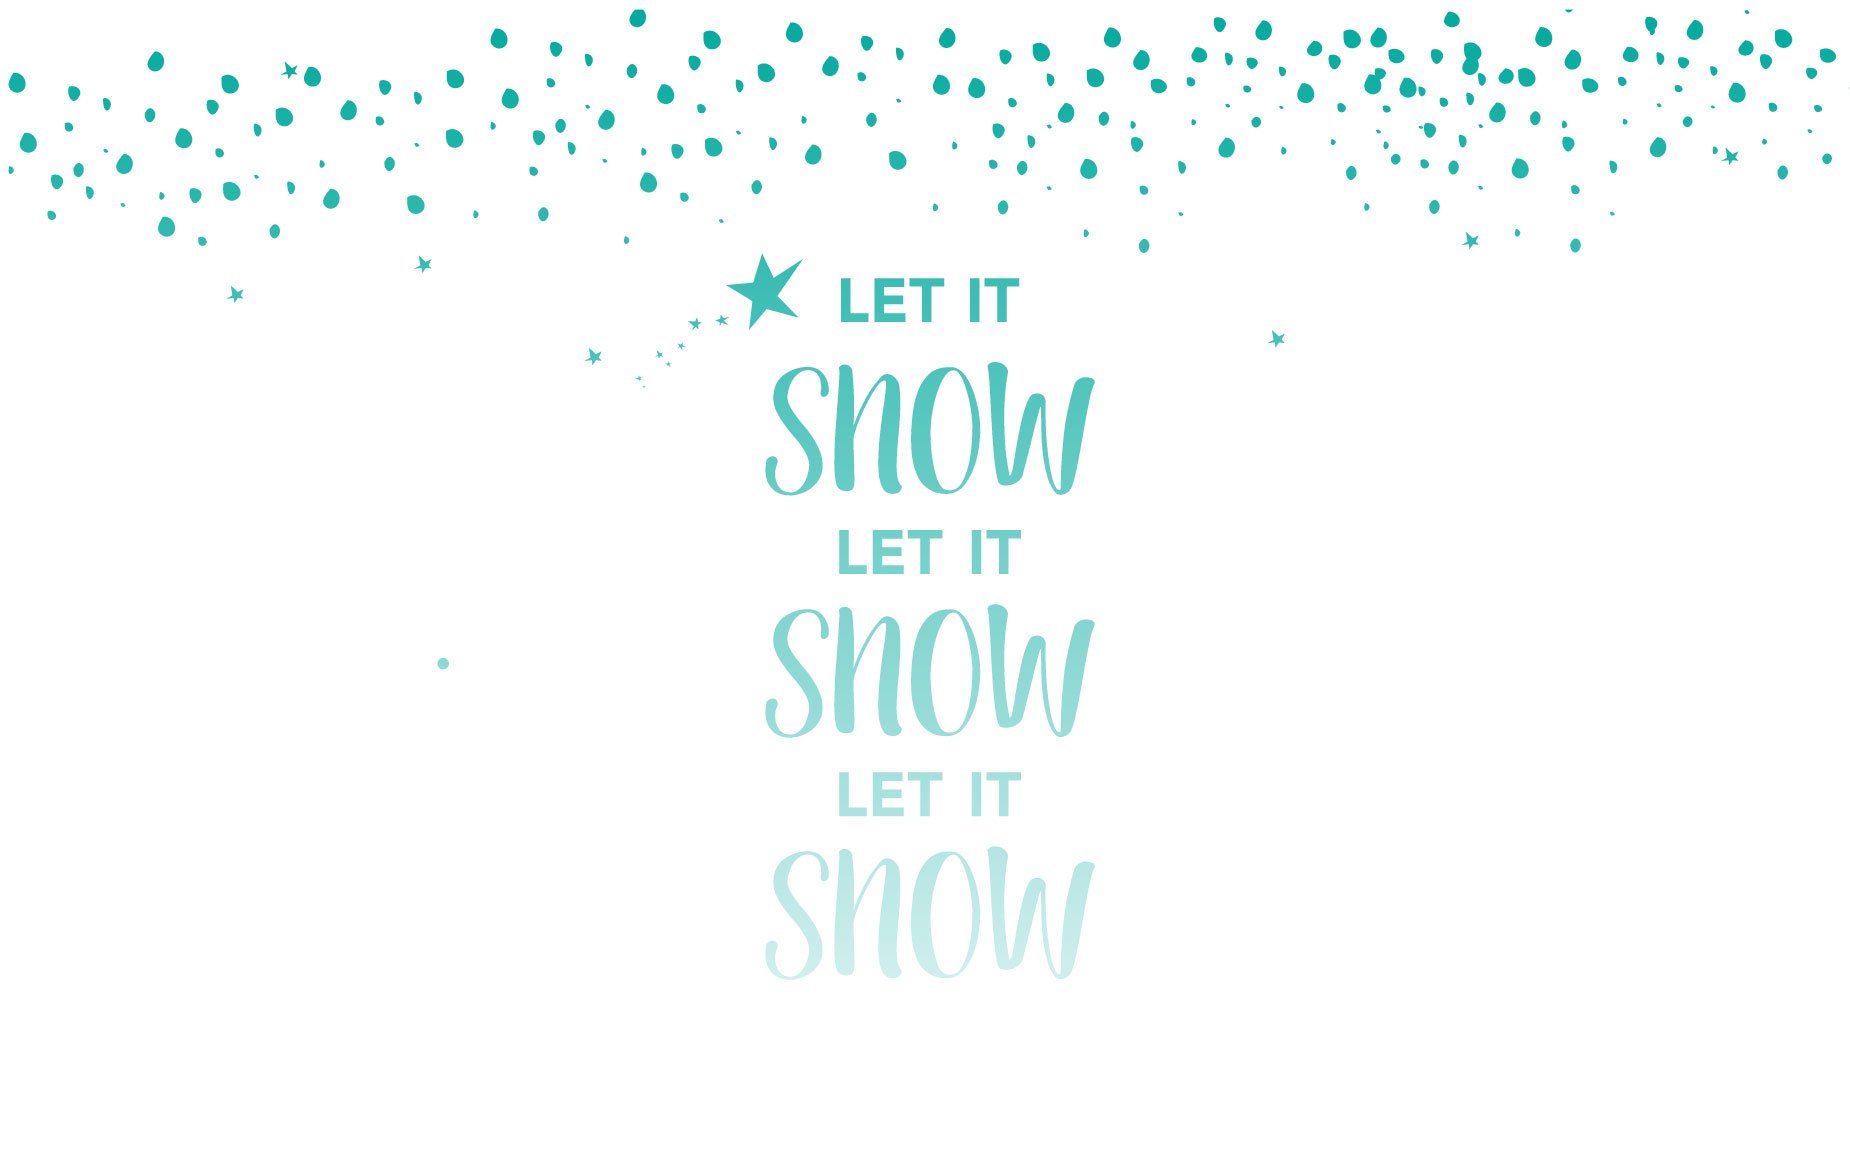 Let It Snow - Let It Snow Let It Snow Let , HD Wallpaper & Backgrounds